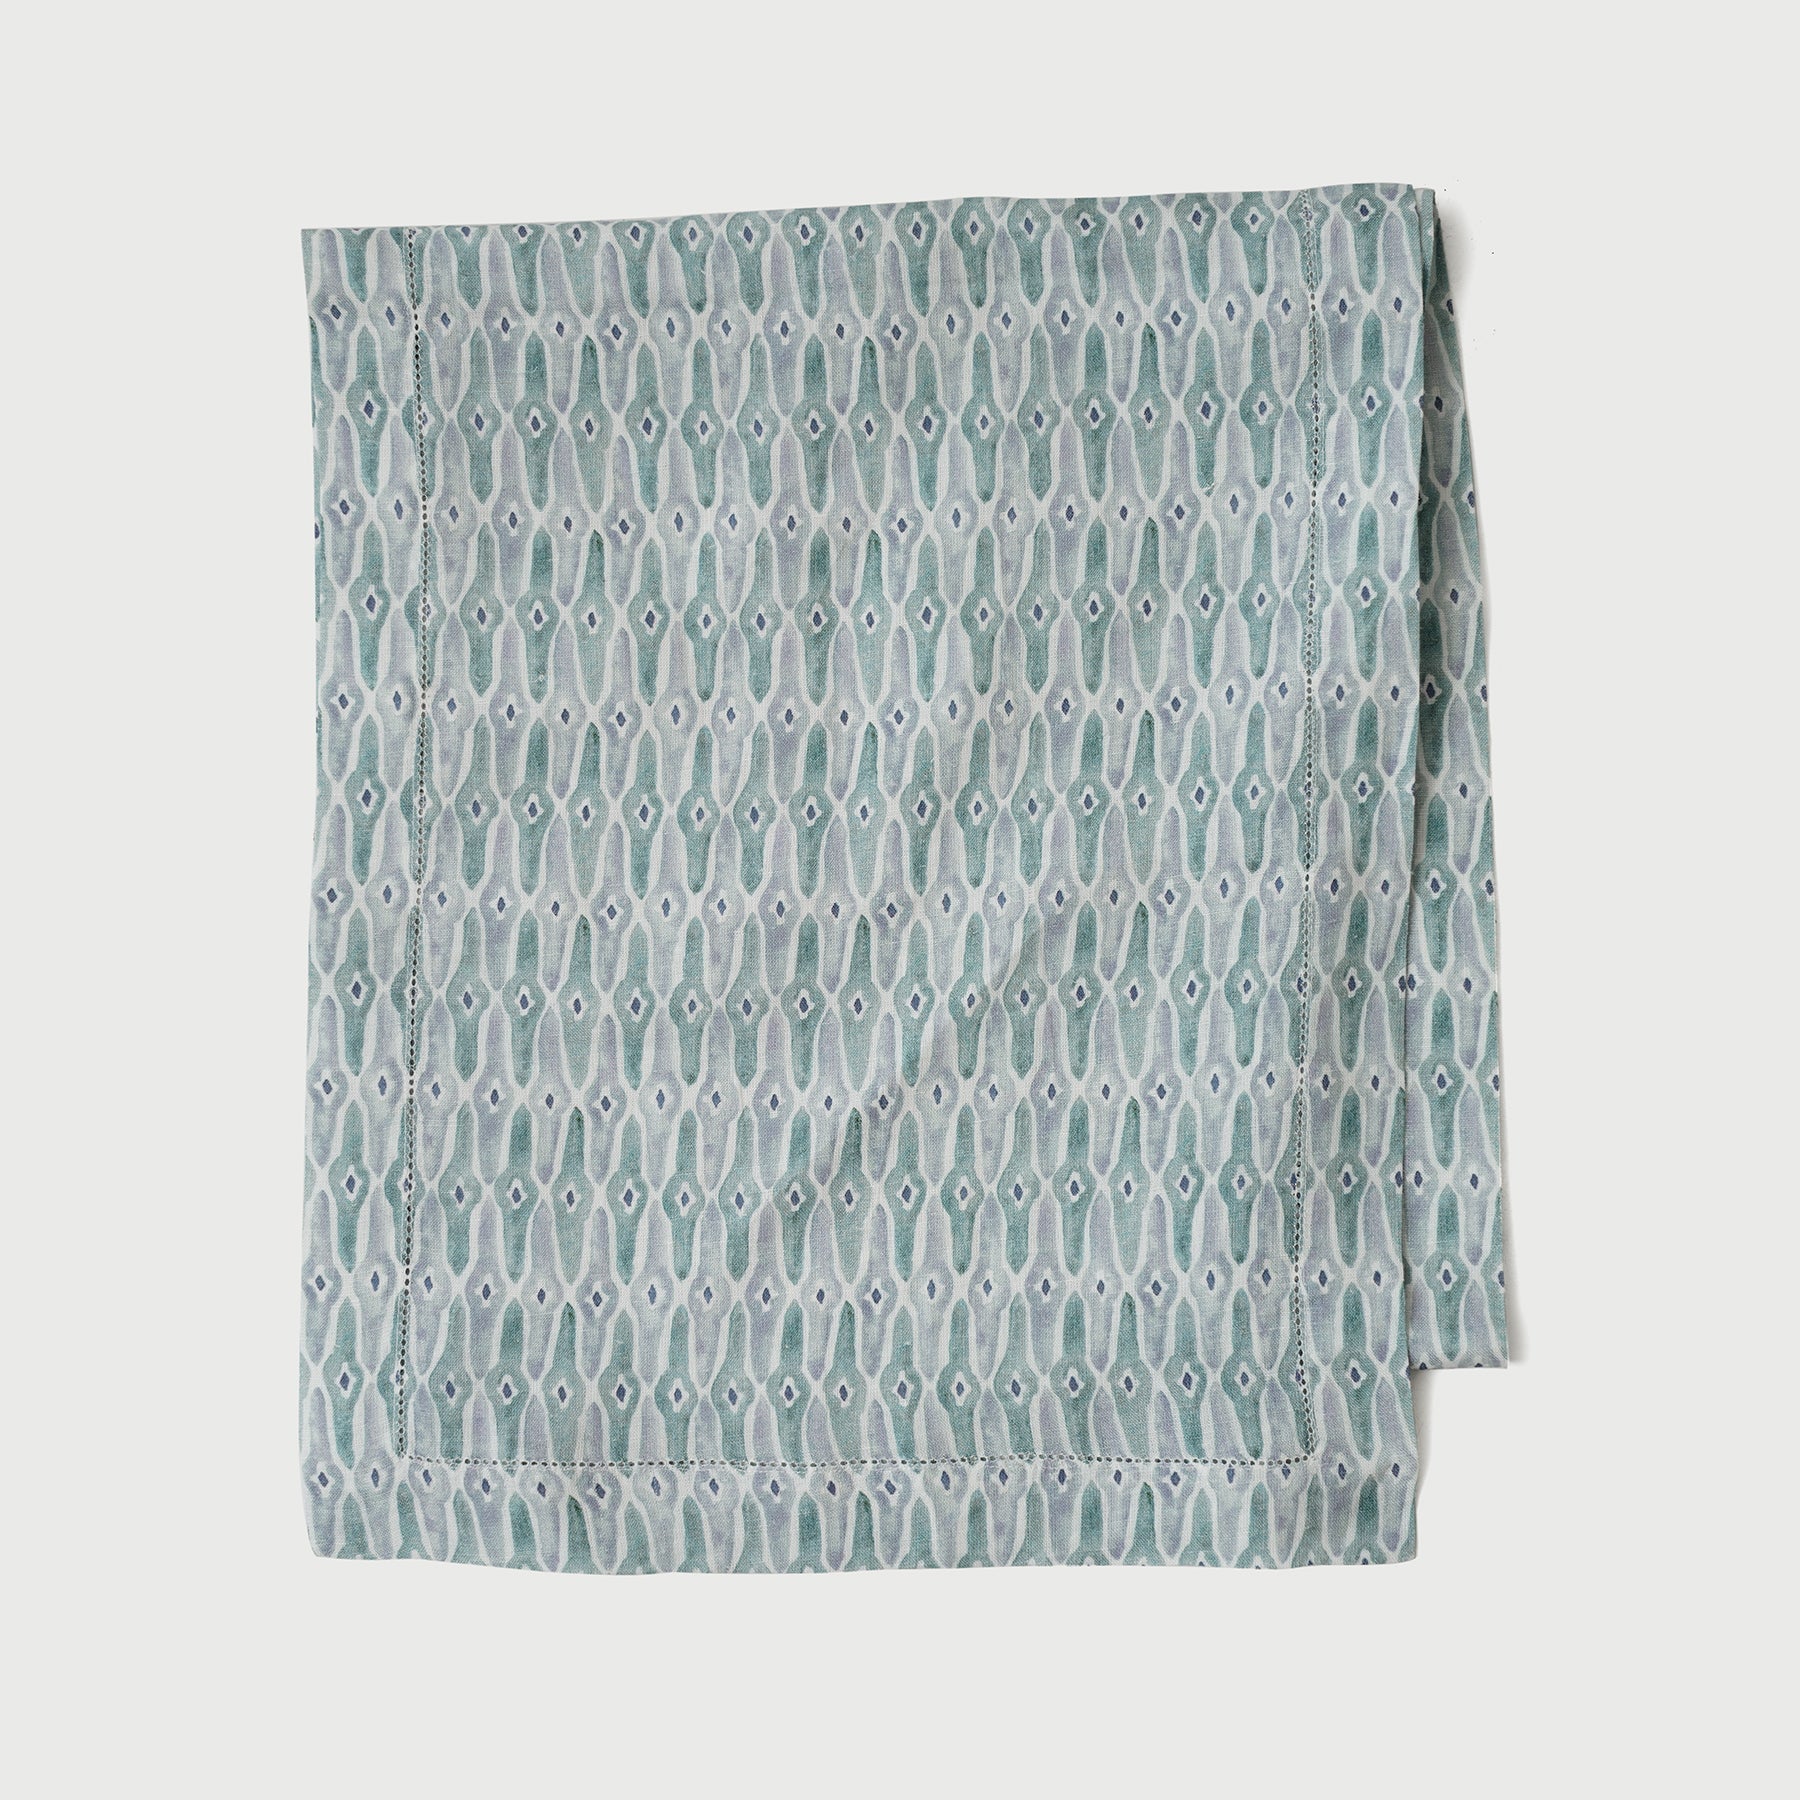 Mosaic Blue Table Runner (6 seater) by Sanctuary Living - Home Artisan